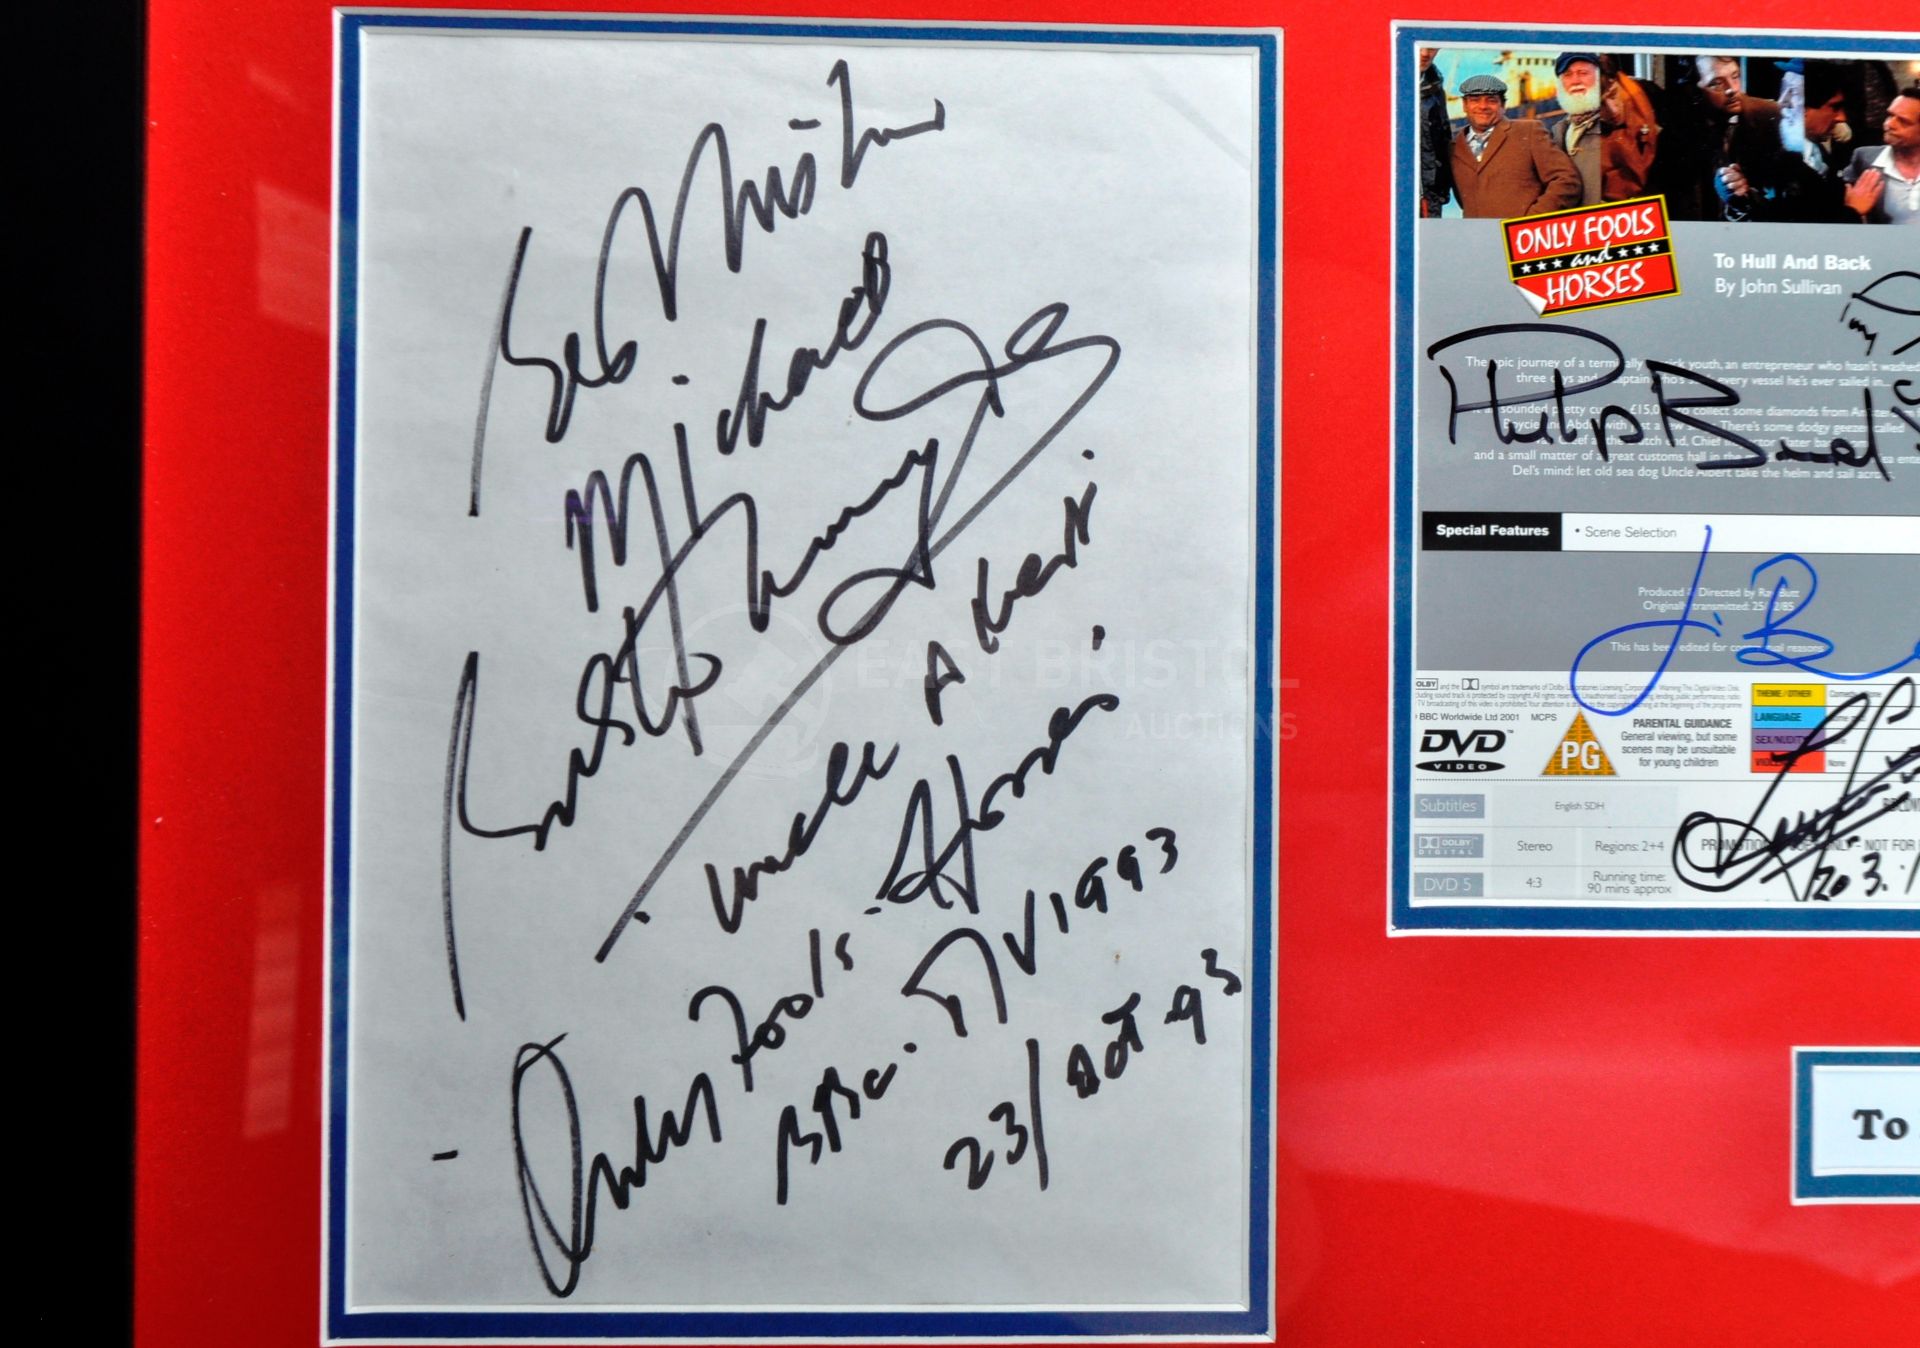 ONLY FOOLS & HORSES - TO HULL AND BACK - FULL CAST AUTOGRAPHS - Image 2 of 6